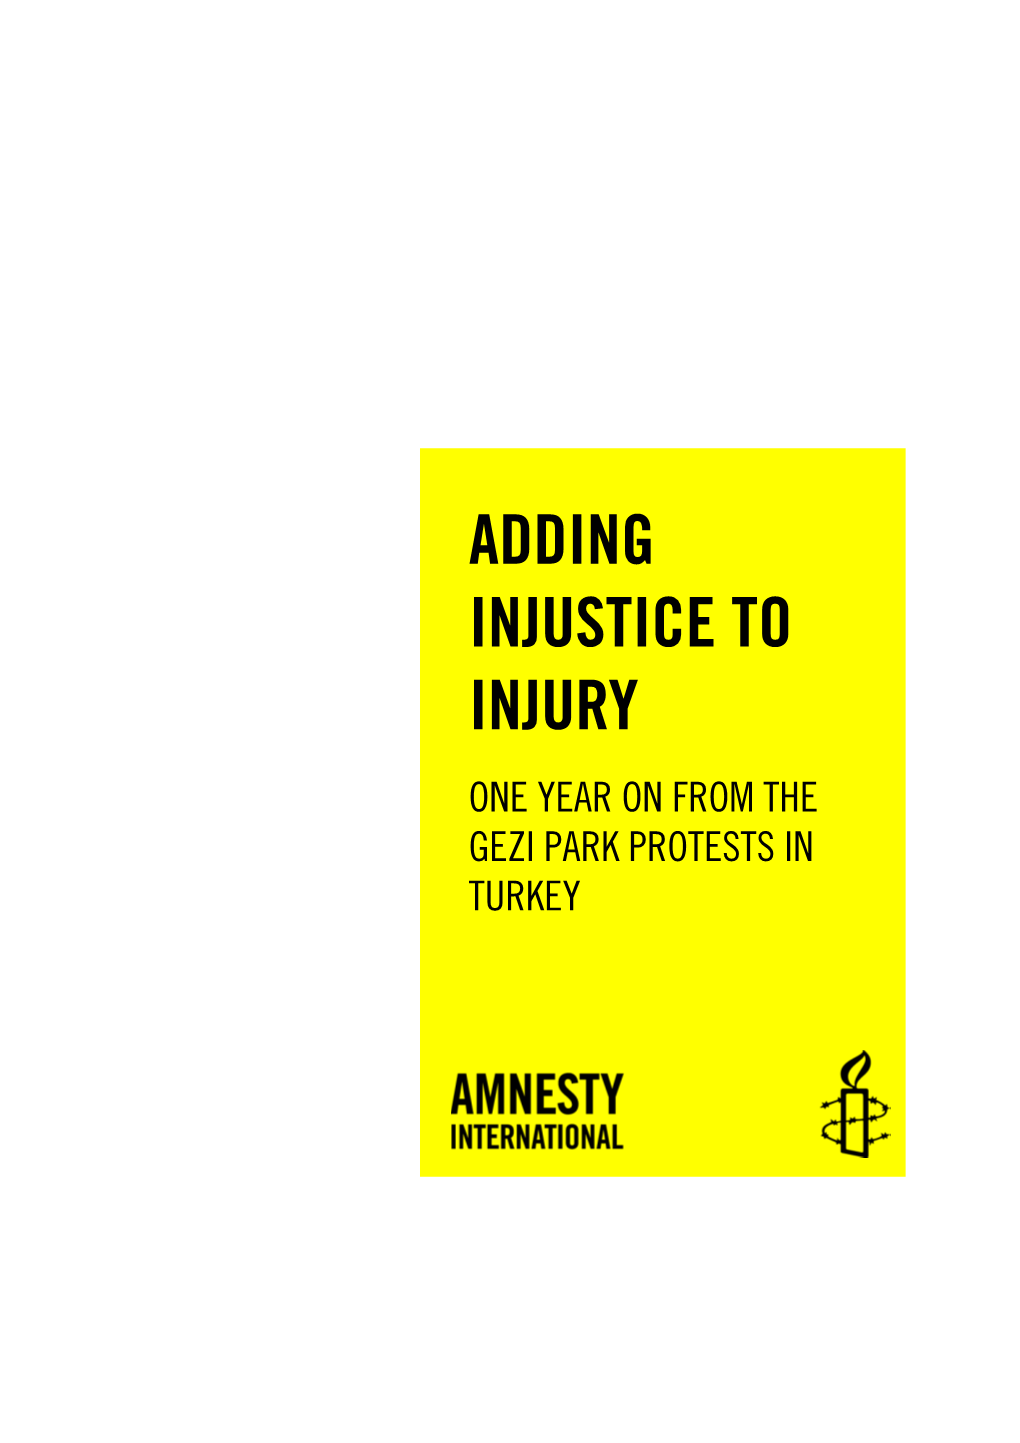 Adding Injustice to Injury One Year on from the Gezi Park Protests in Turkey